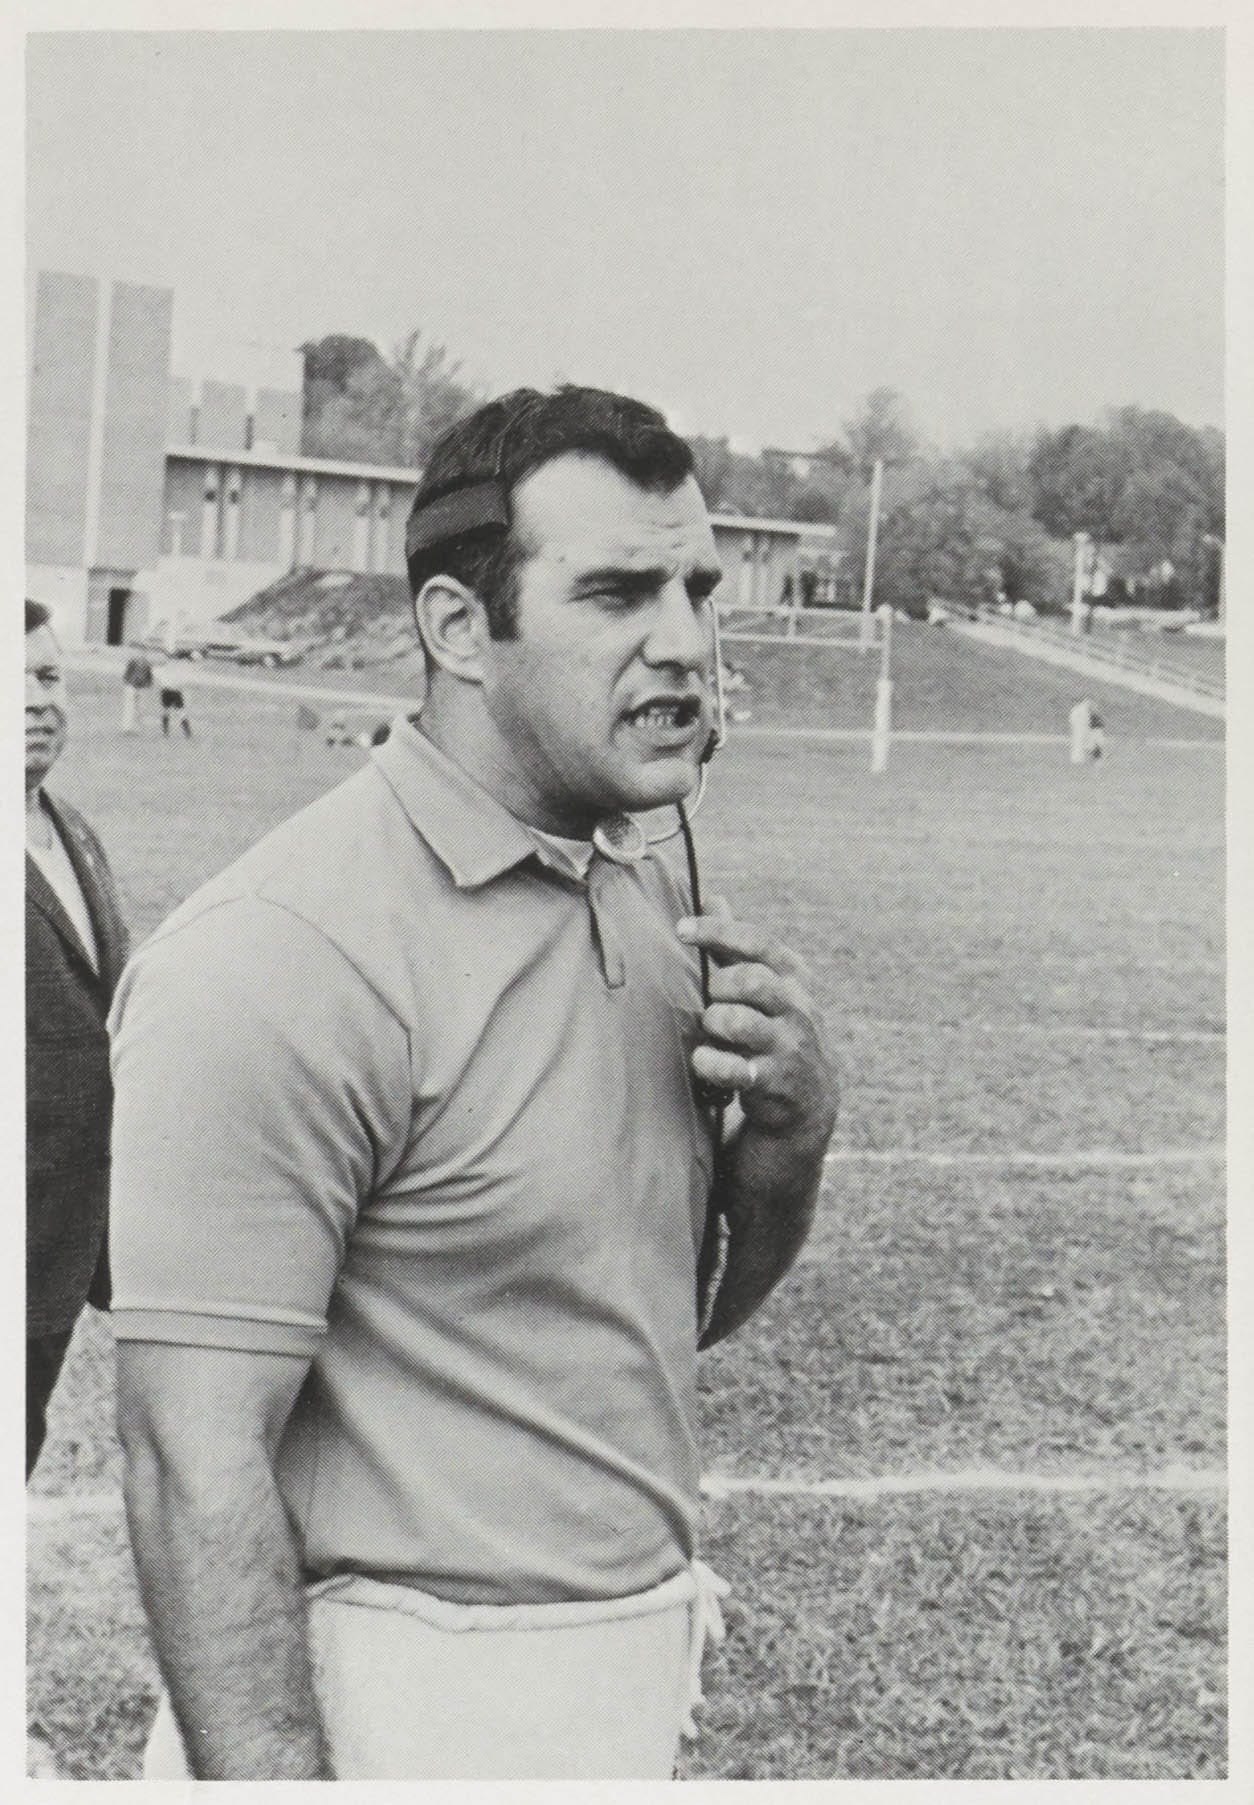 Photo of Carl Runk wearing a headset on a playing field. 